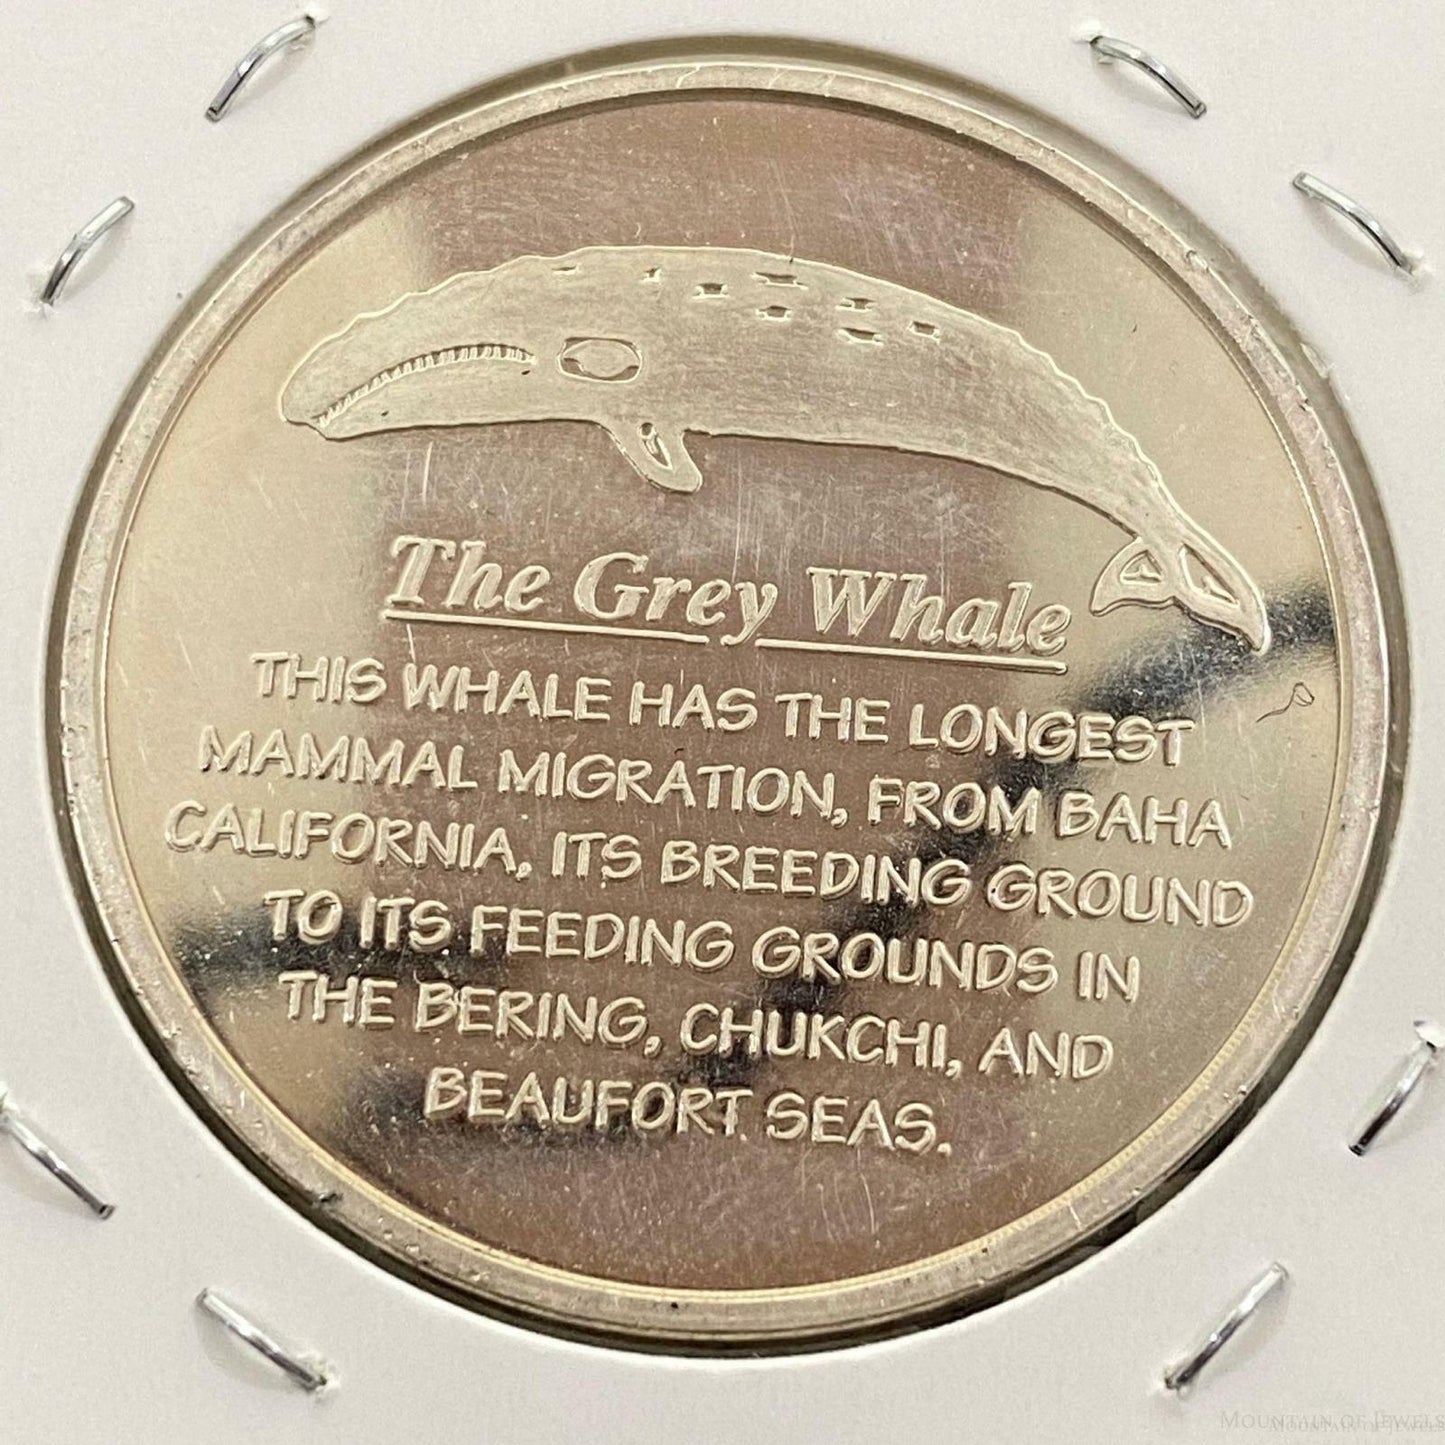 US 1.0 Ounce The Gray Whale .999 Fine Silver by Alaskan Mint #20122-3